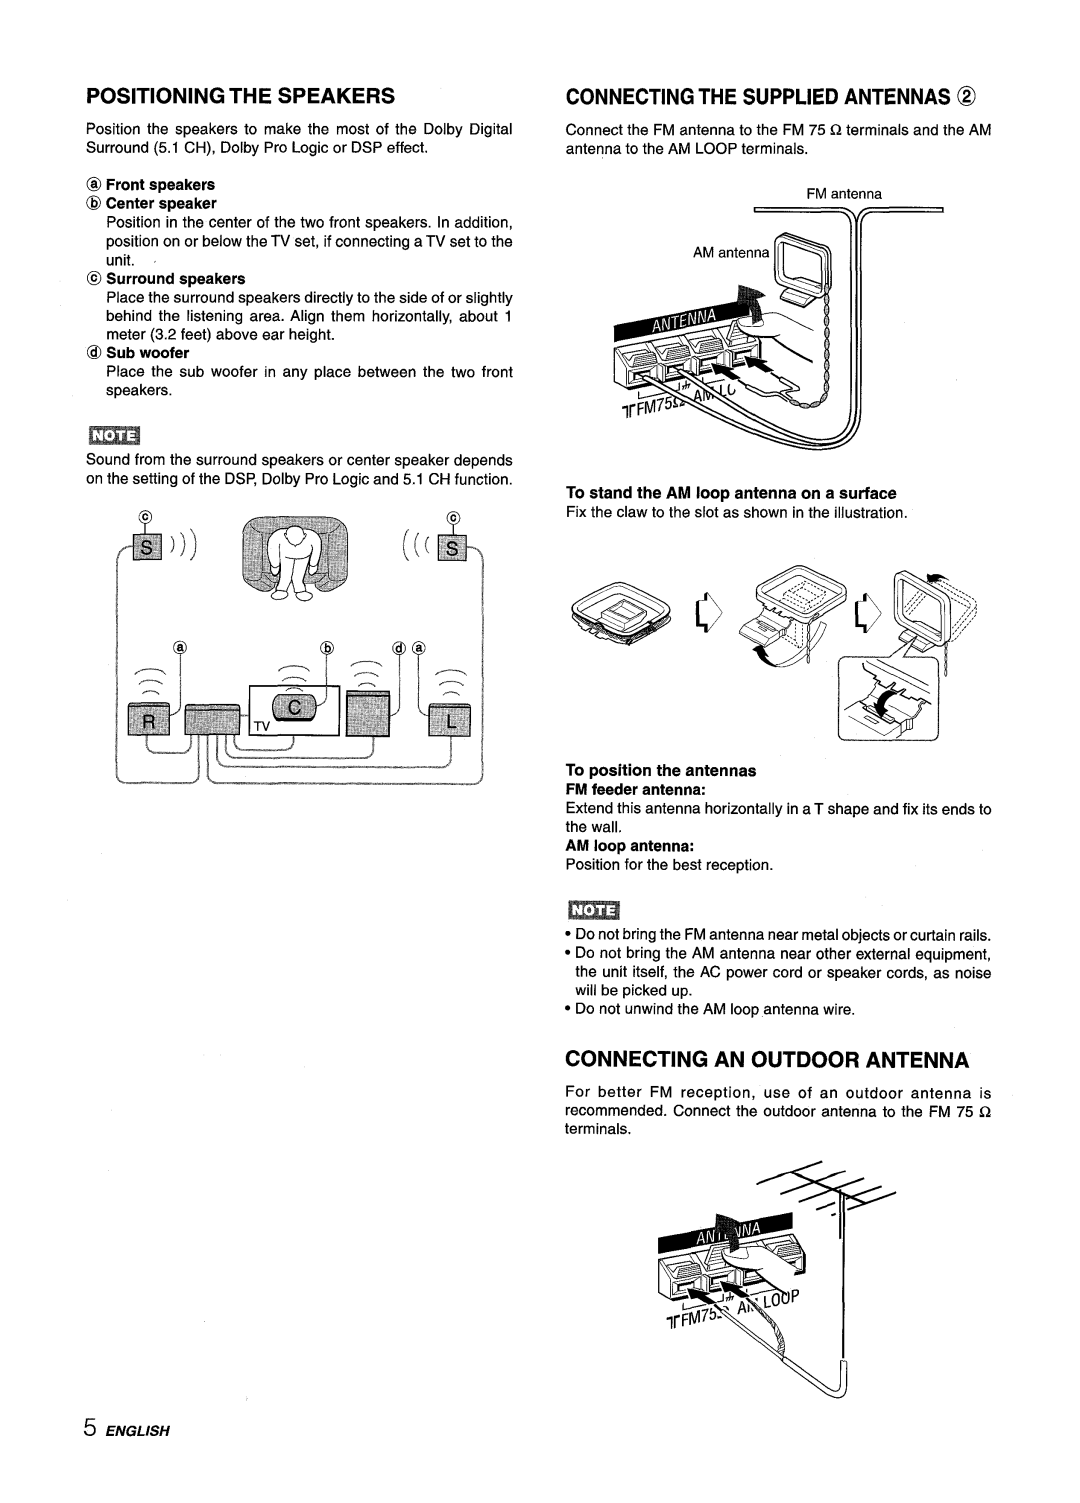 Aiwa AV-D25 Positioning The Speakers, Connecting The Supplied Antennas @, Connecting An Outdoor Antenna, AM loop antenna 